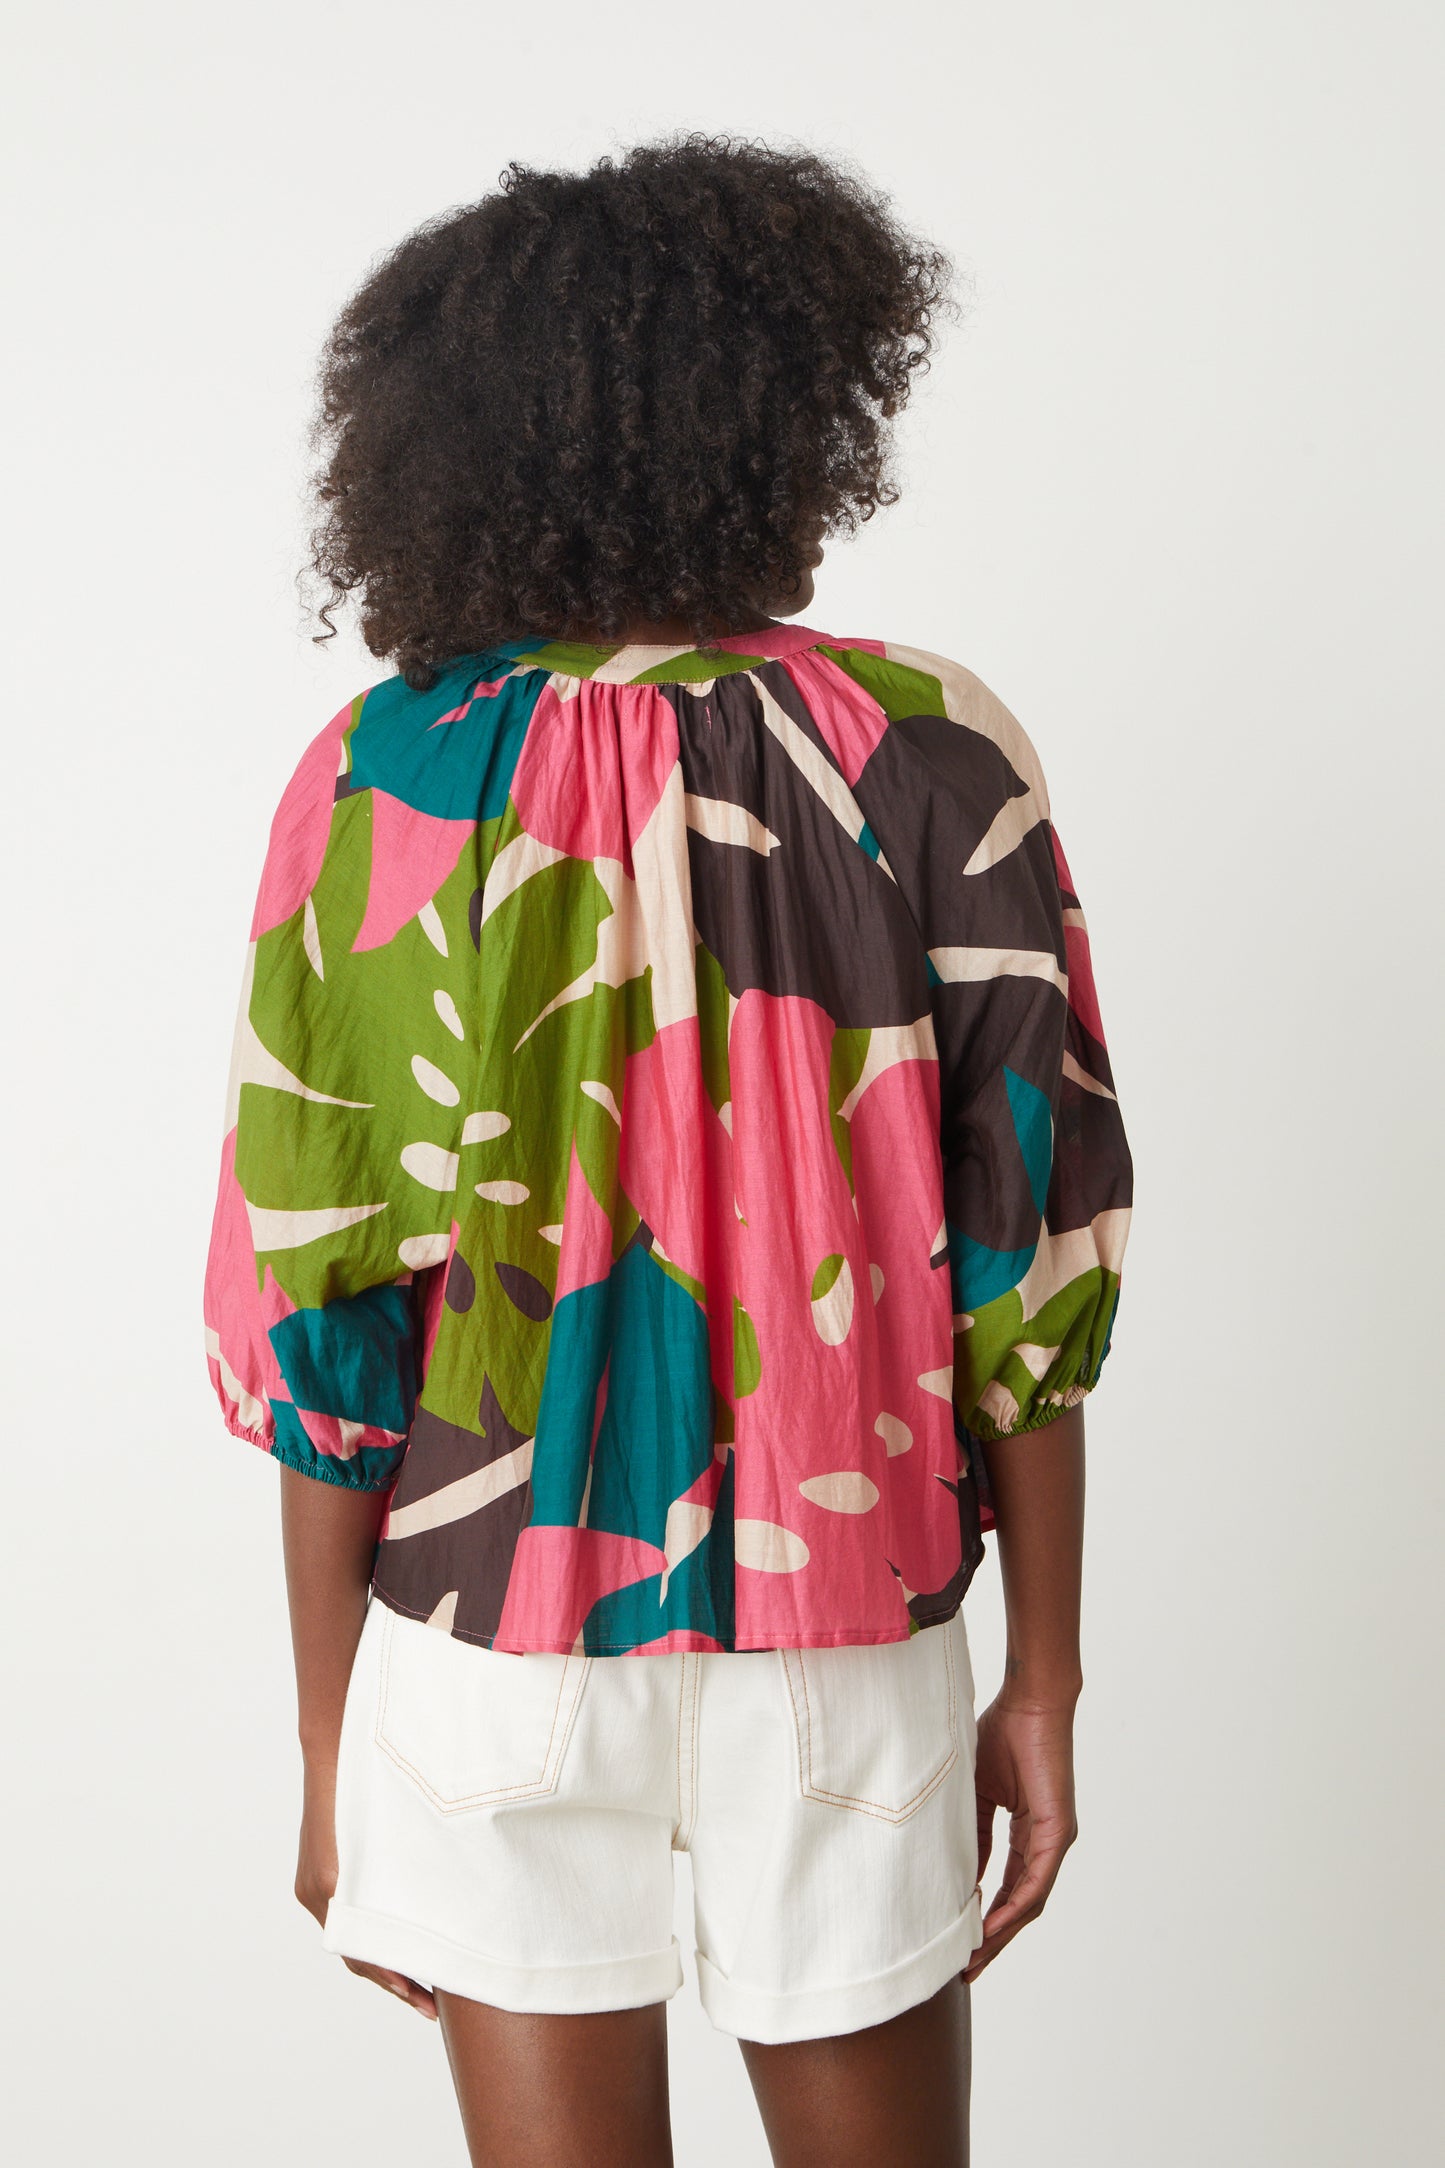 The back view of a woman wearing an Ariel Printed Top by Velvet by Graham & Spencer blouse.-26577406001345